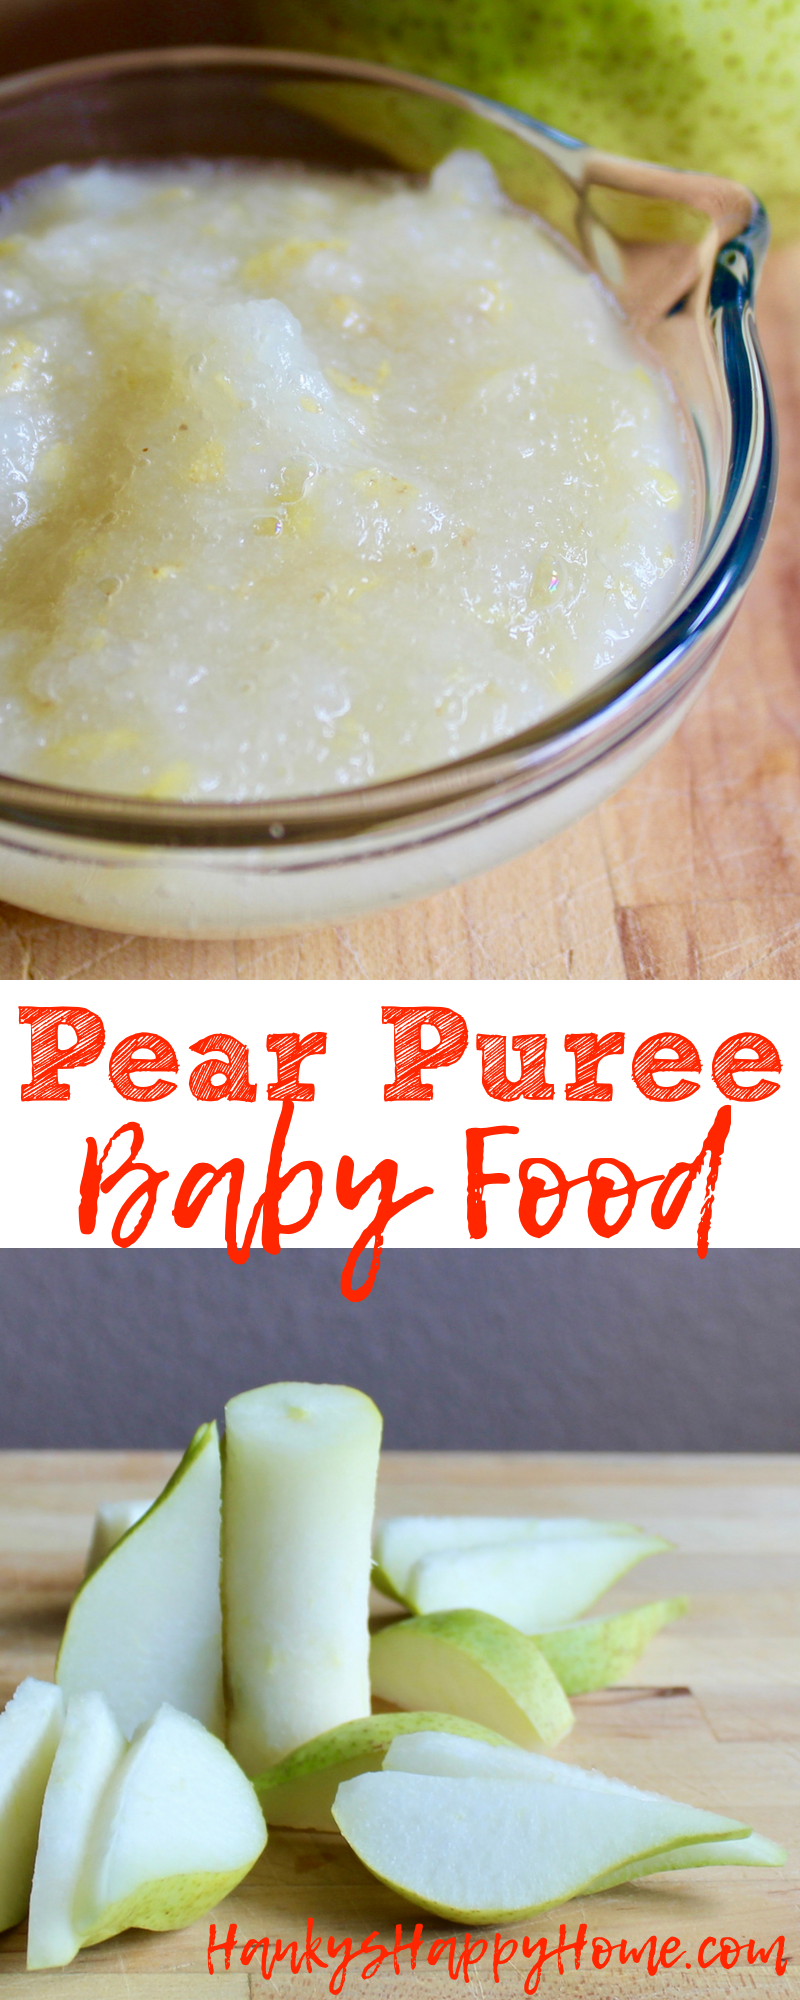 Pear puree is a perfect for introducing solids as it's gentle on baby's little tummy and high in fiber, vitamin C, and potassium.